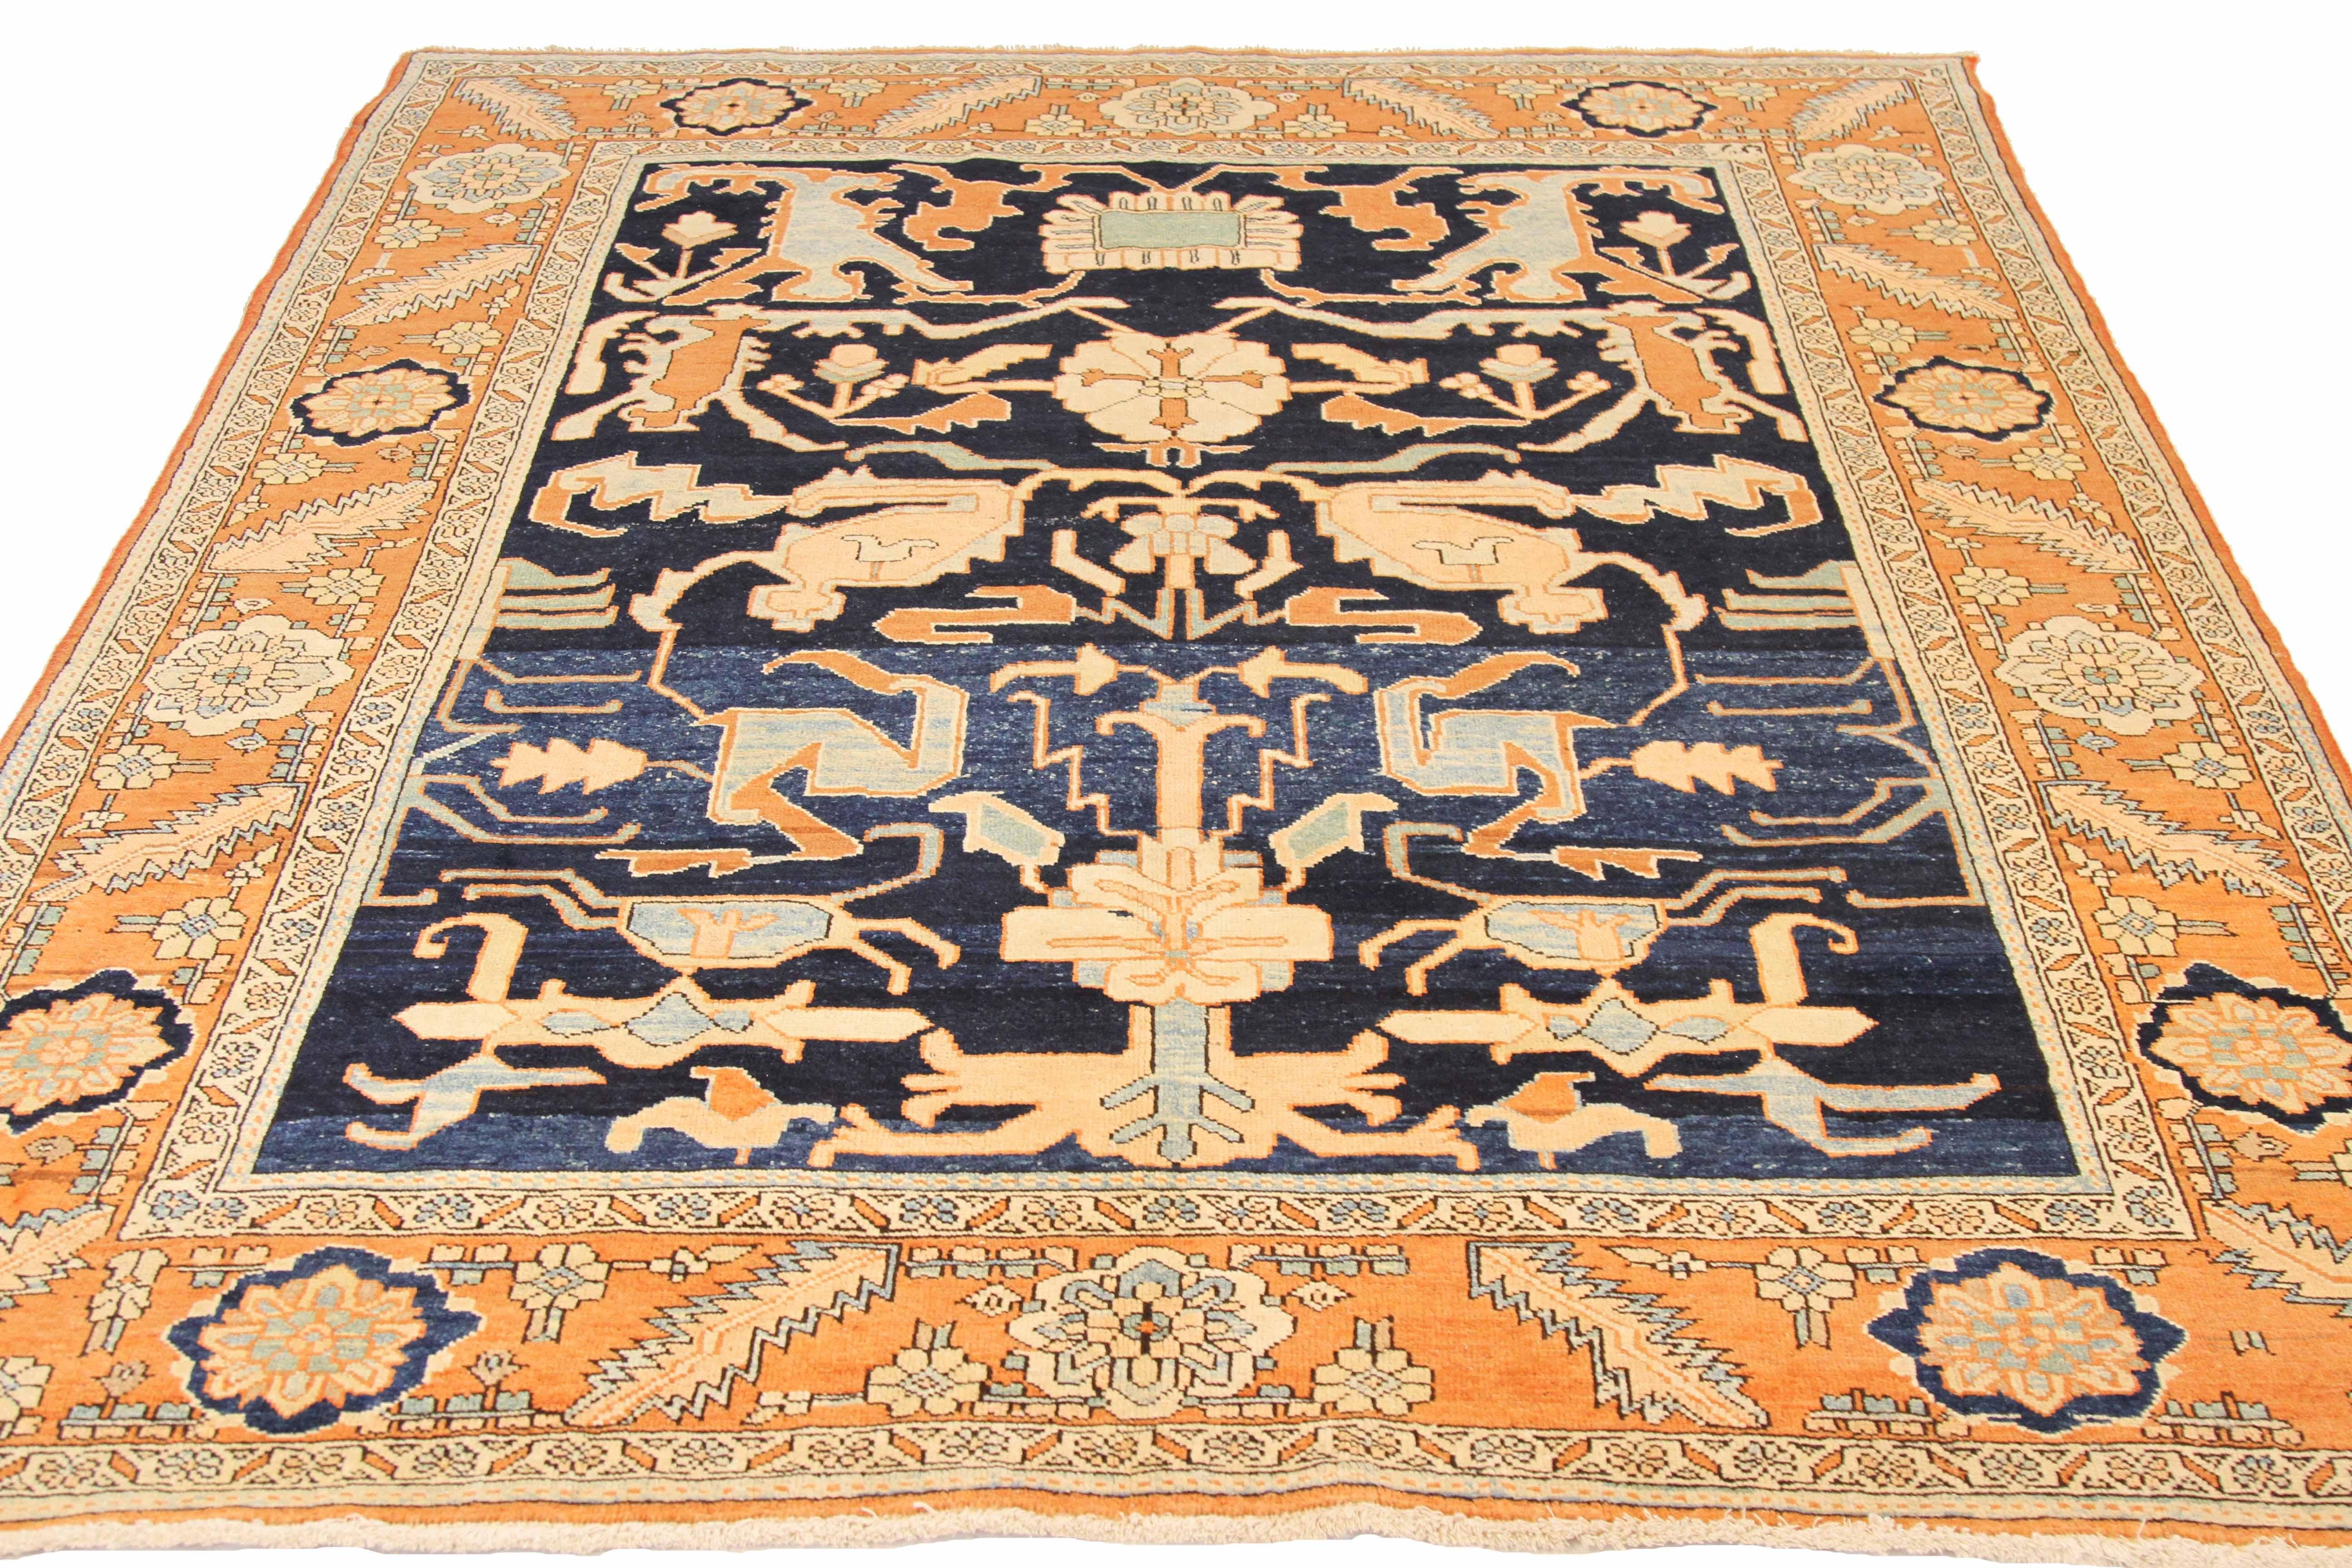 Vintage Persian area rug handwoven from the finest sheep’s wool. It’s colored with all-natural vegetable dyes that are safe for humans and pets. It’s a traditional Heriz design handwoven by expert artisans.It’s a lovely area rug that can be